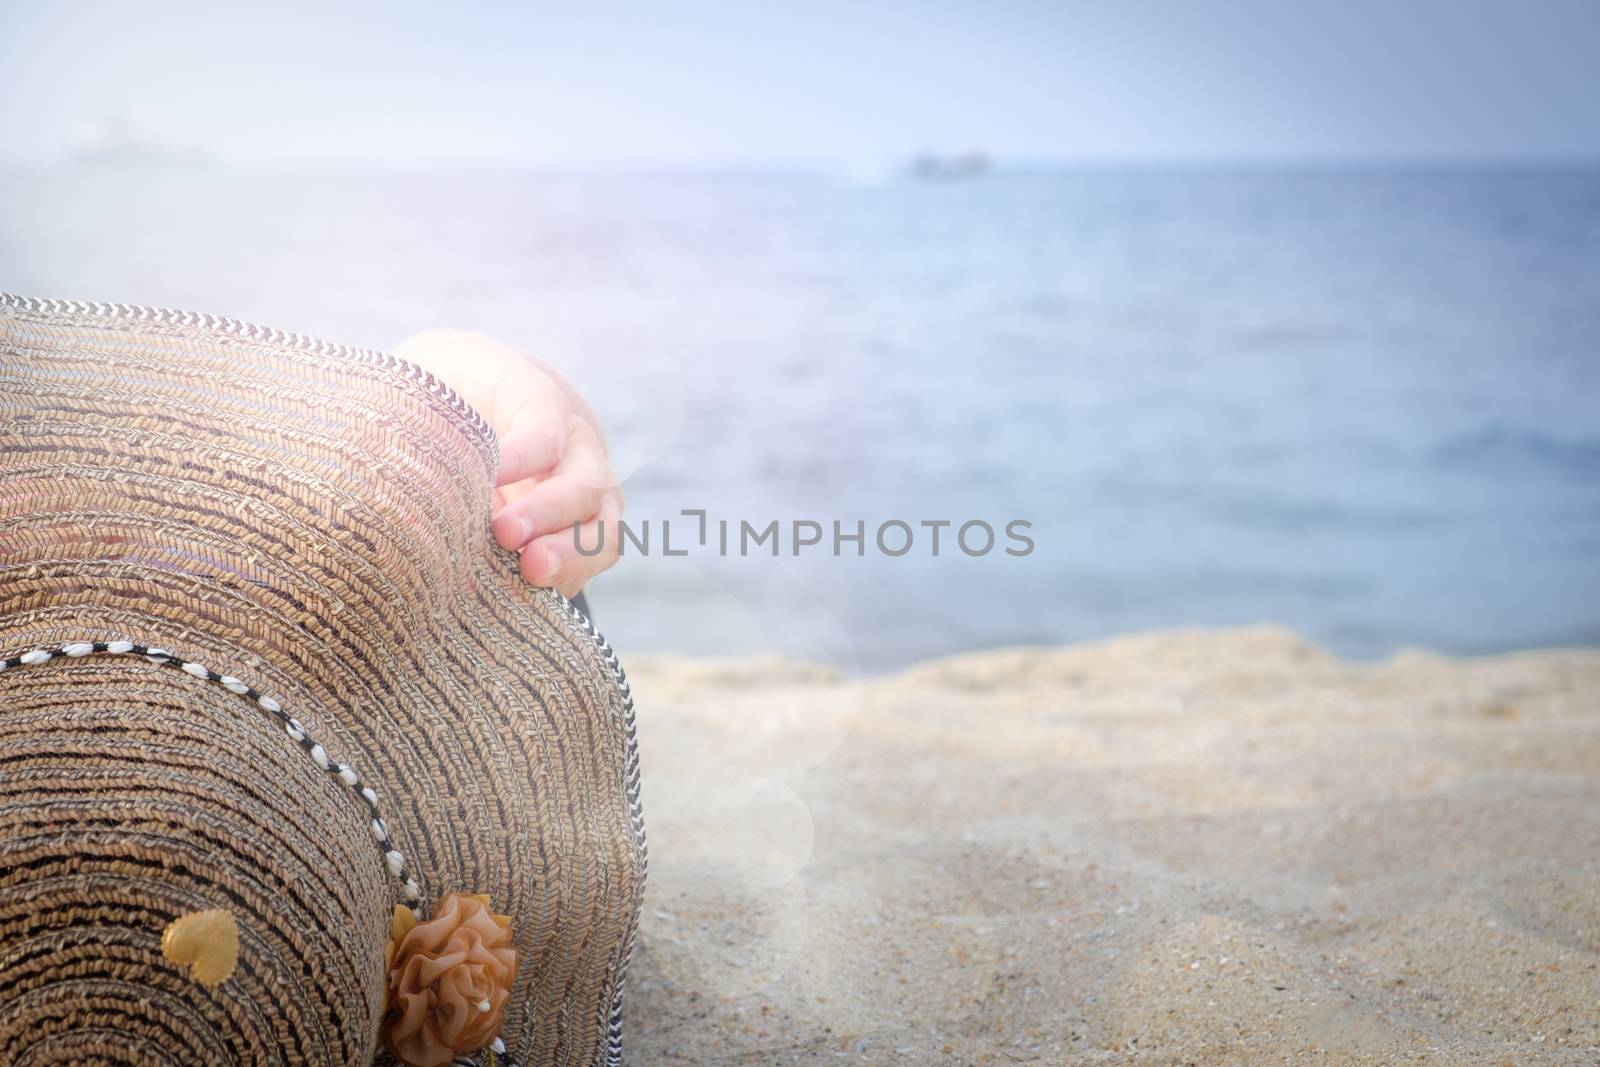 Women wearing hats are sunbathing by the sea with copy space and lens flear.